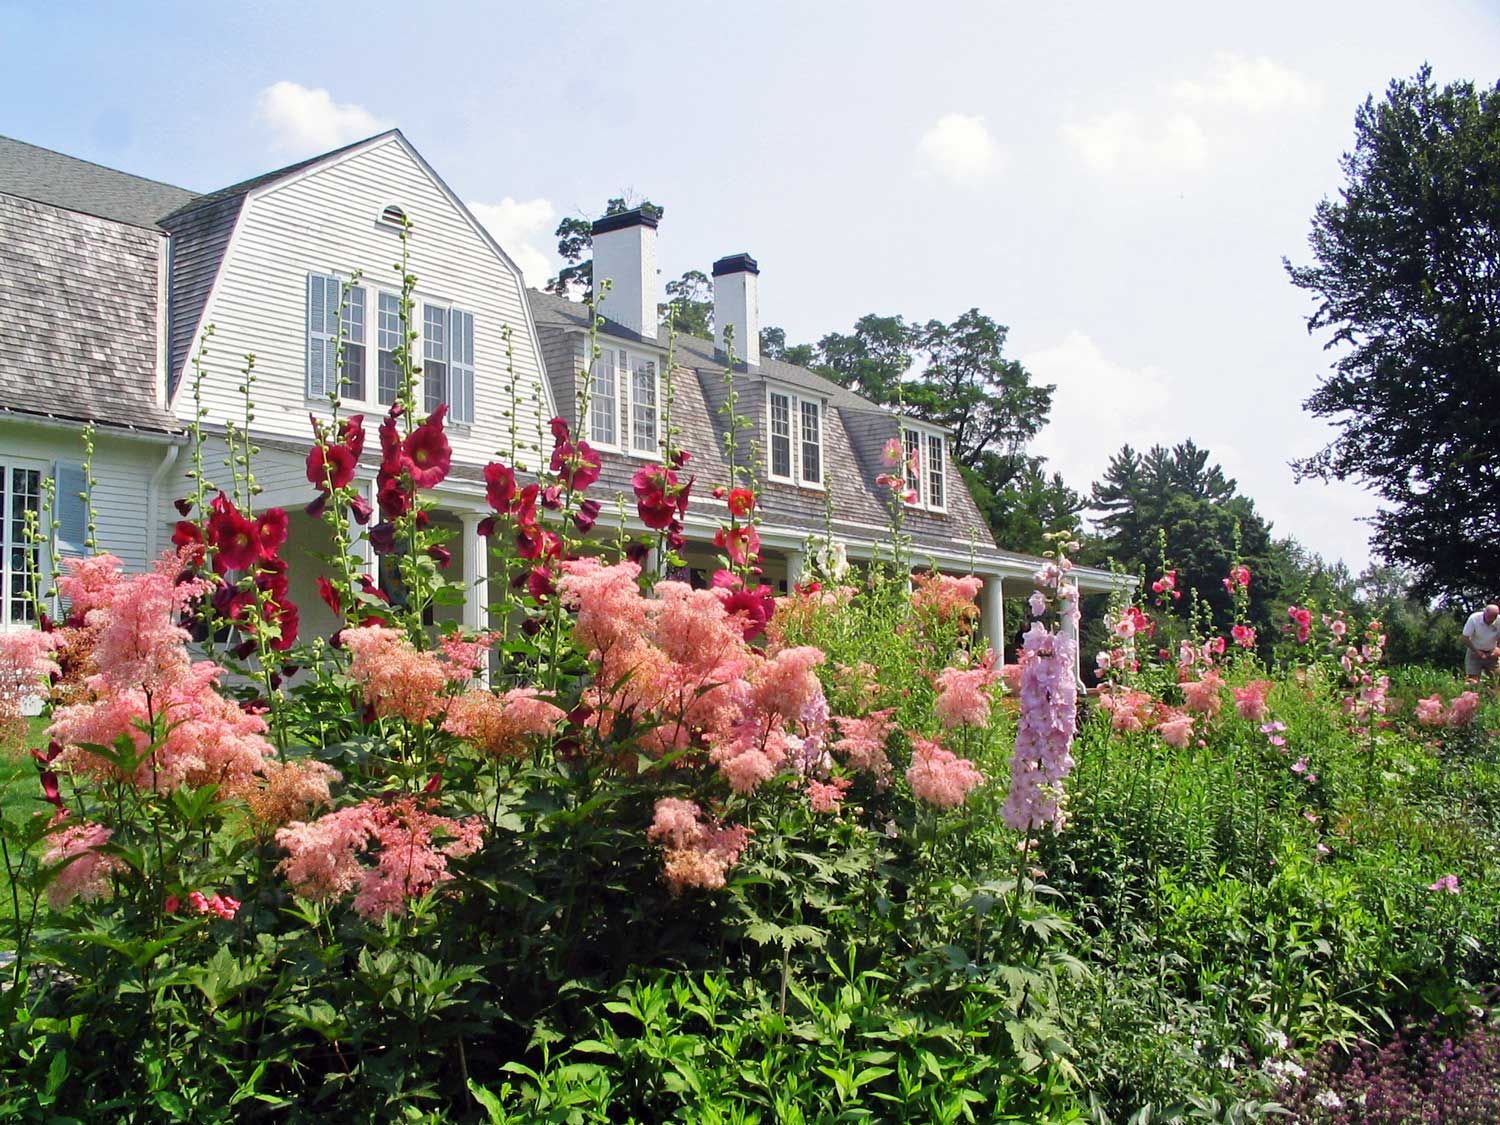 Flowers in many colors make up the gardens in front of the John Hay Estate at The Fells.